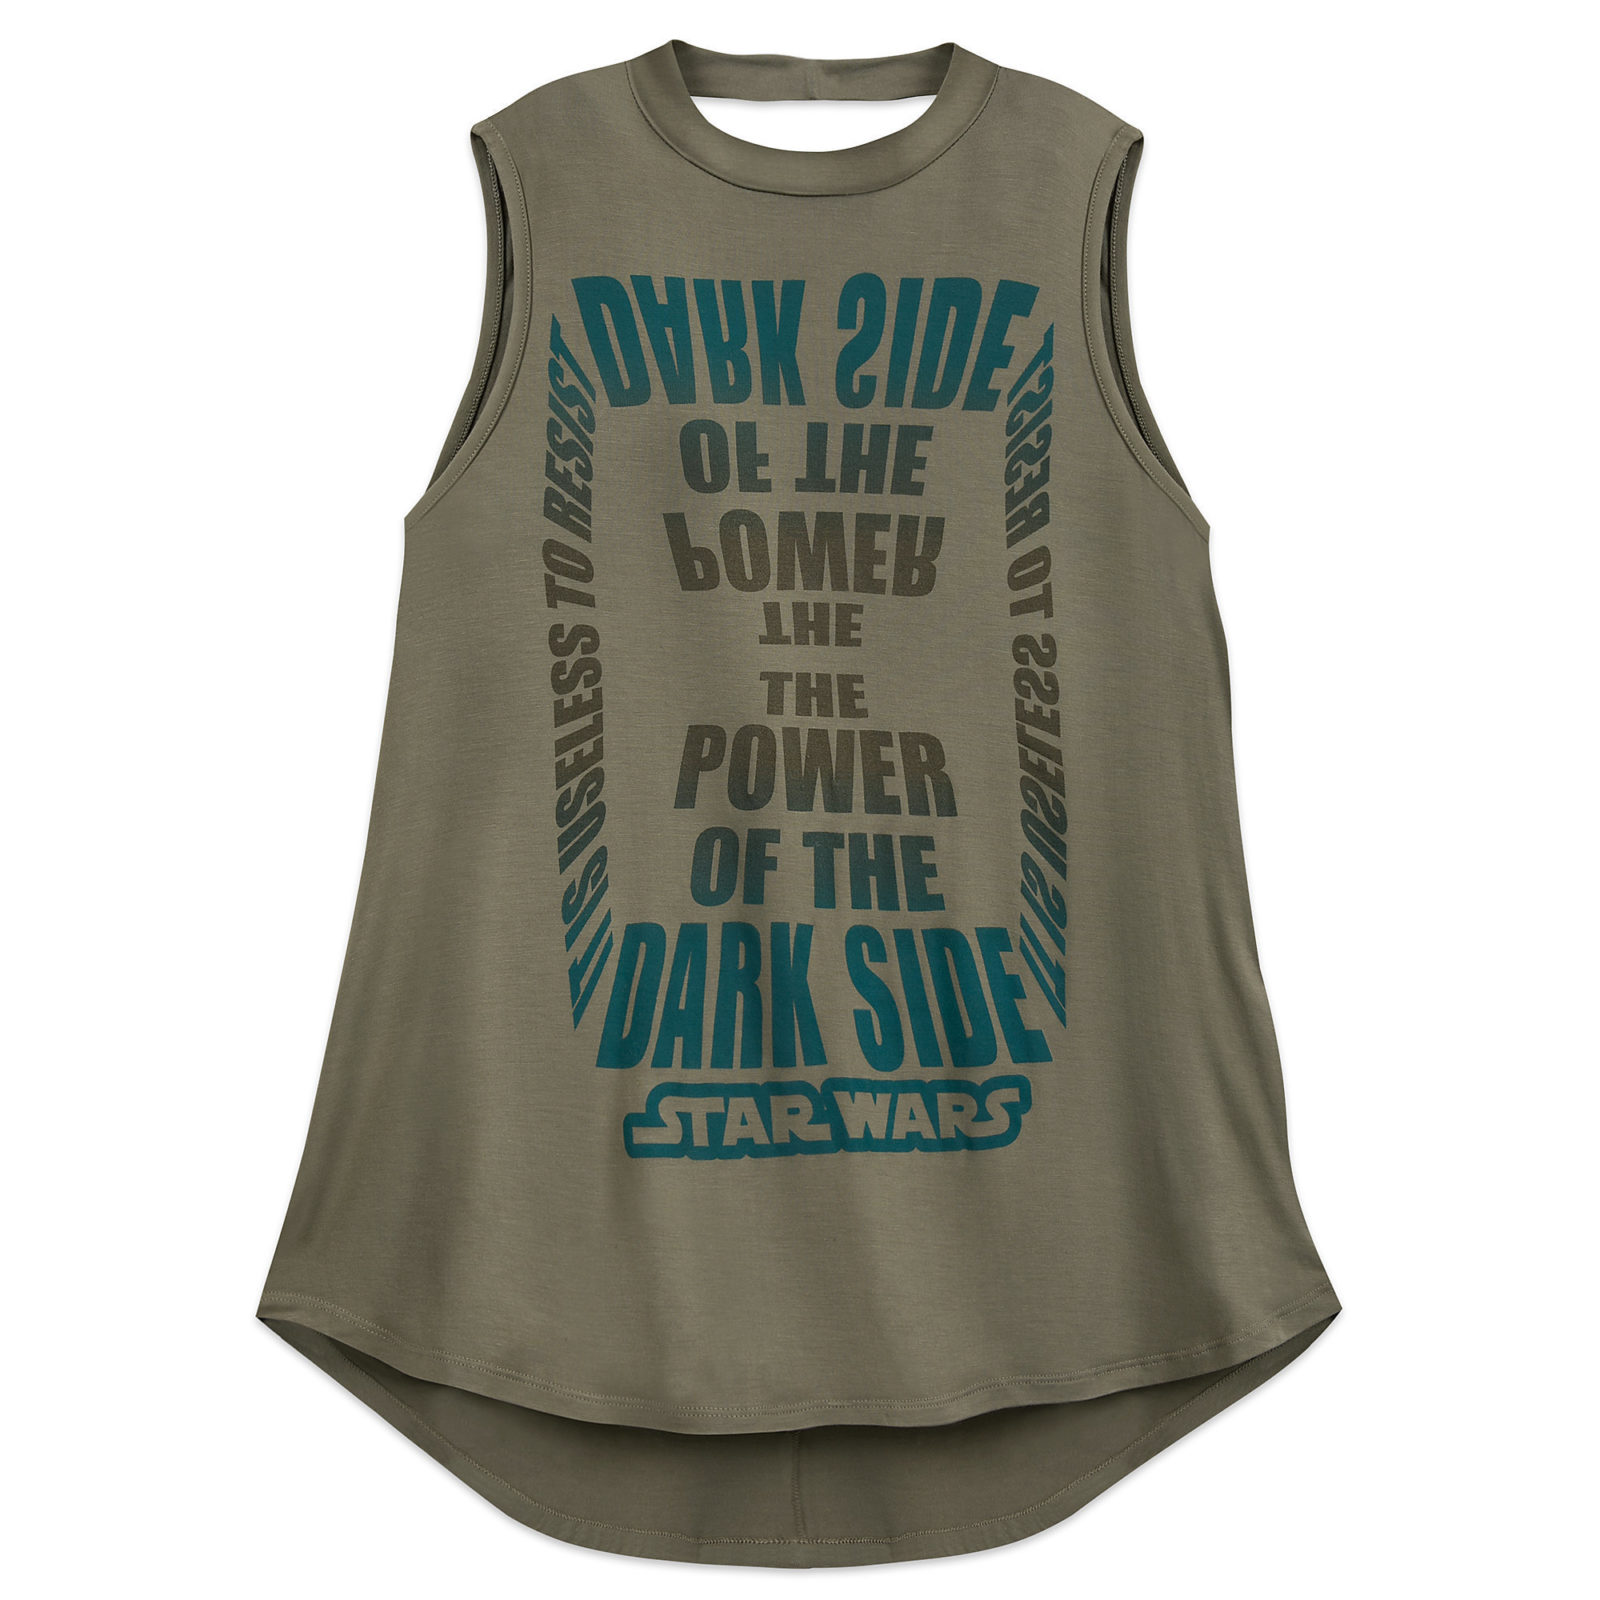 Women's Star Wars The Power Of The Dark Side Tank Top at Shop Disney